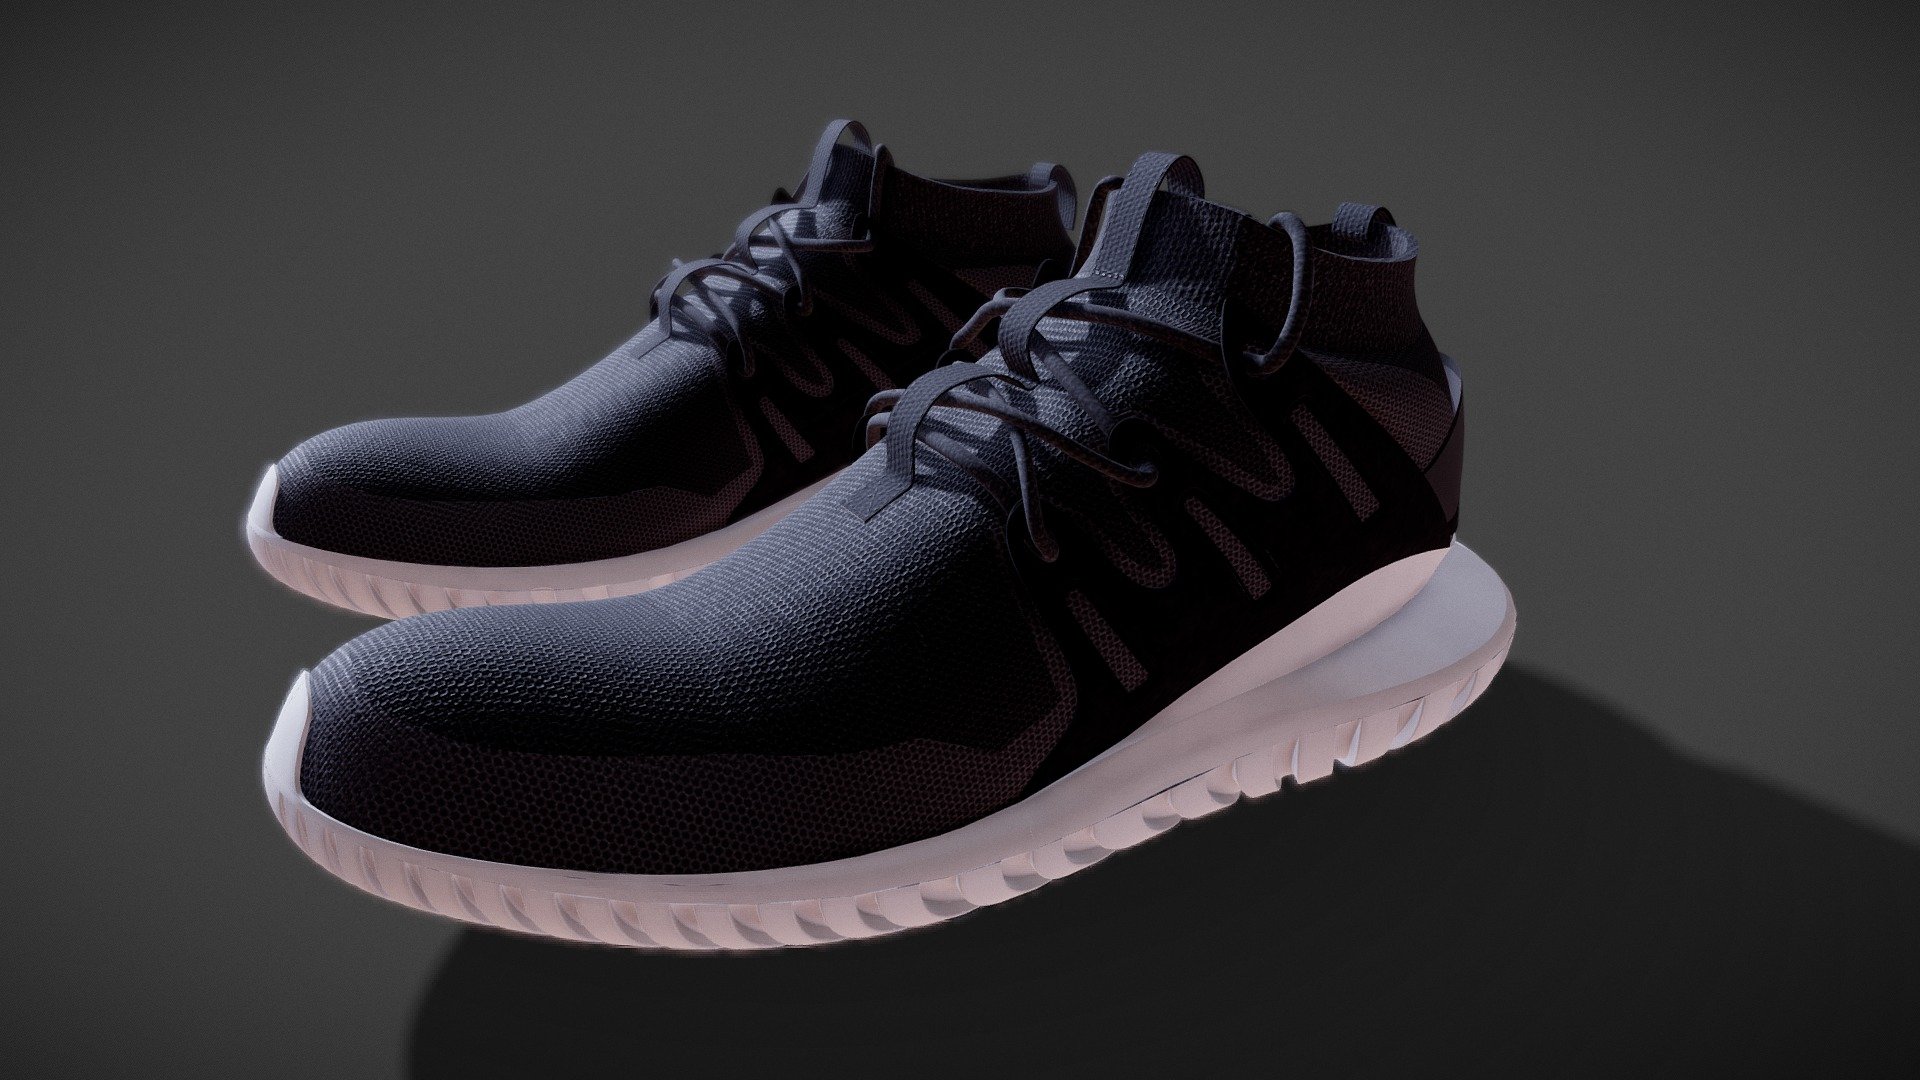 A converted CAD model used for this product visualization project: https://www.artstation.com/artwork/182dK8

CAD model used: https://grabcad.com/library/adidas-tubular-nova-1

Texturing done in Substance Painter 3d model